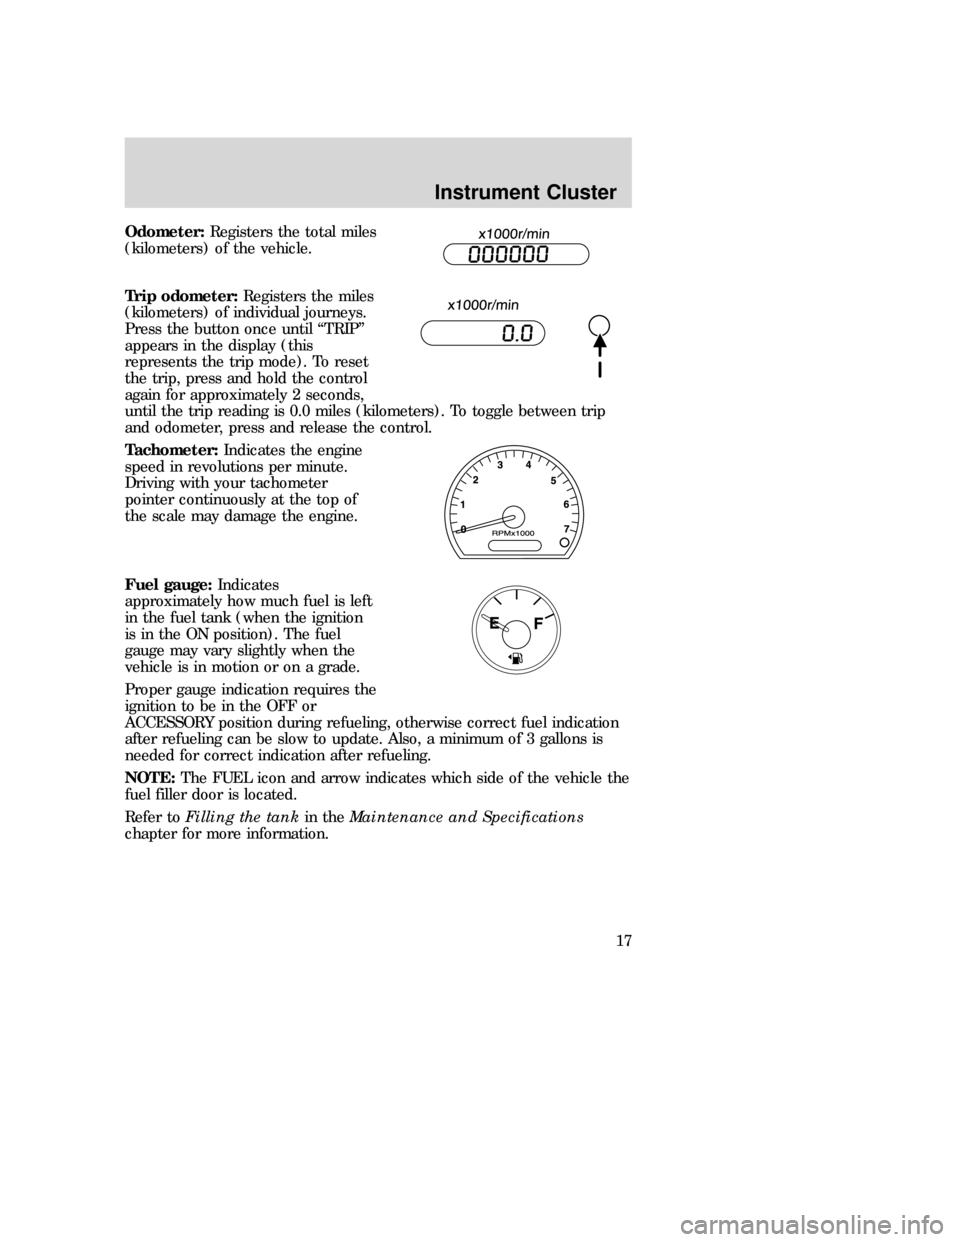 MAZDA MODEL B-SERIES 2006  Owners Manual (in English) Odometer:Registers the total miles
(kilometers) of the vehicle.
Trip odometer:Registers the miles
(kilometers) of individual journeys.
Press the button once until “TRIP”
appears in the display (th